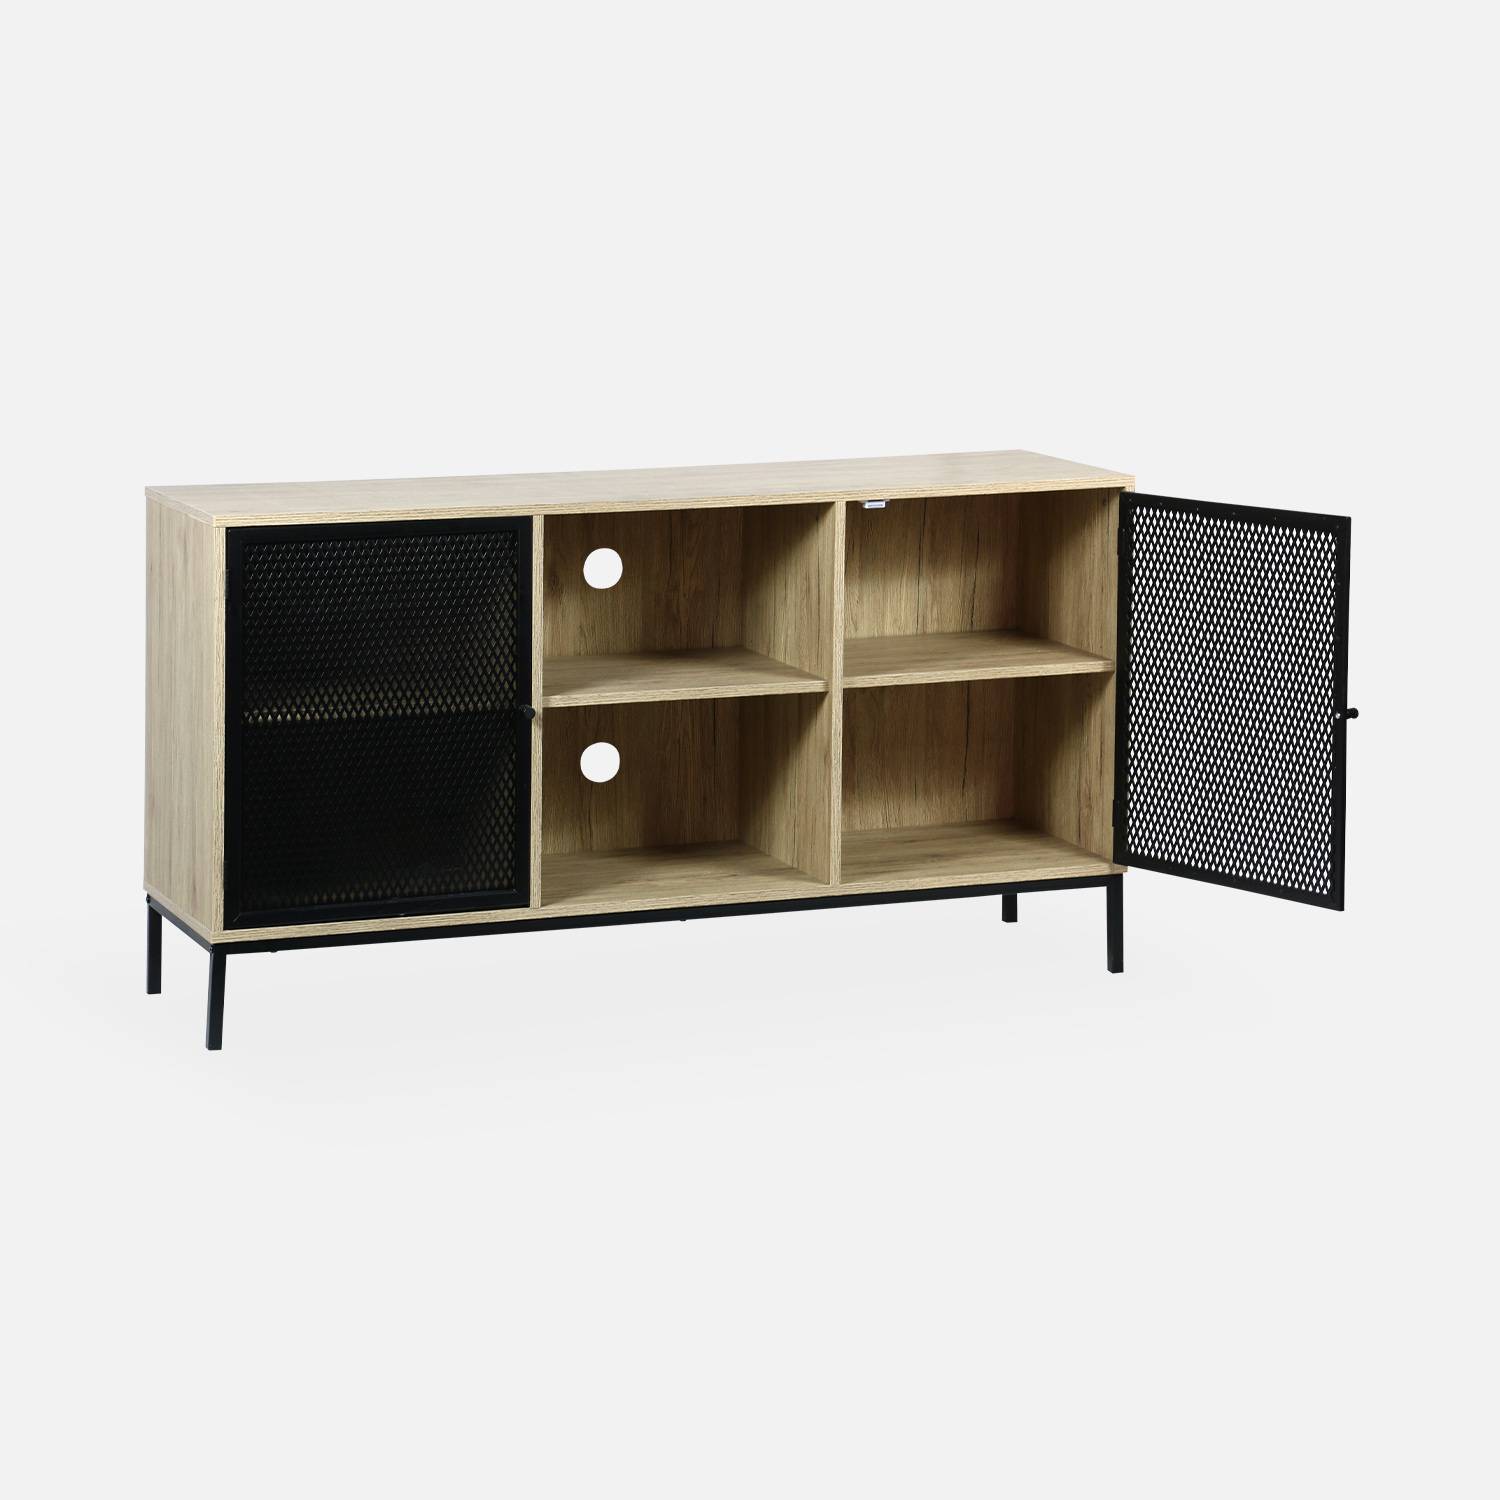 TV stand - metal and wood-effect - 2 doors and 6 compartments - Brooklyn Photo5